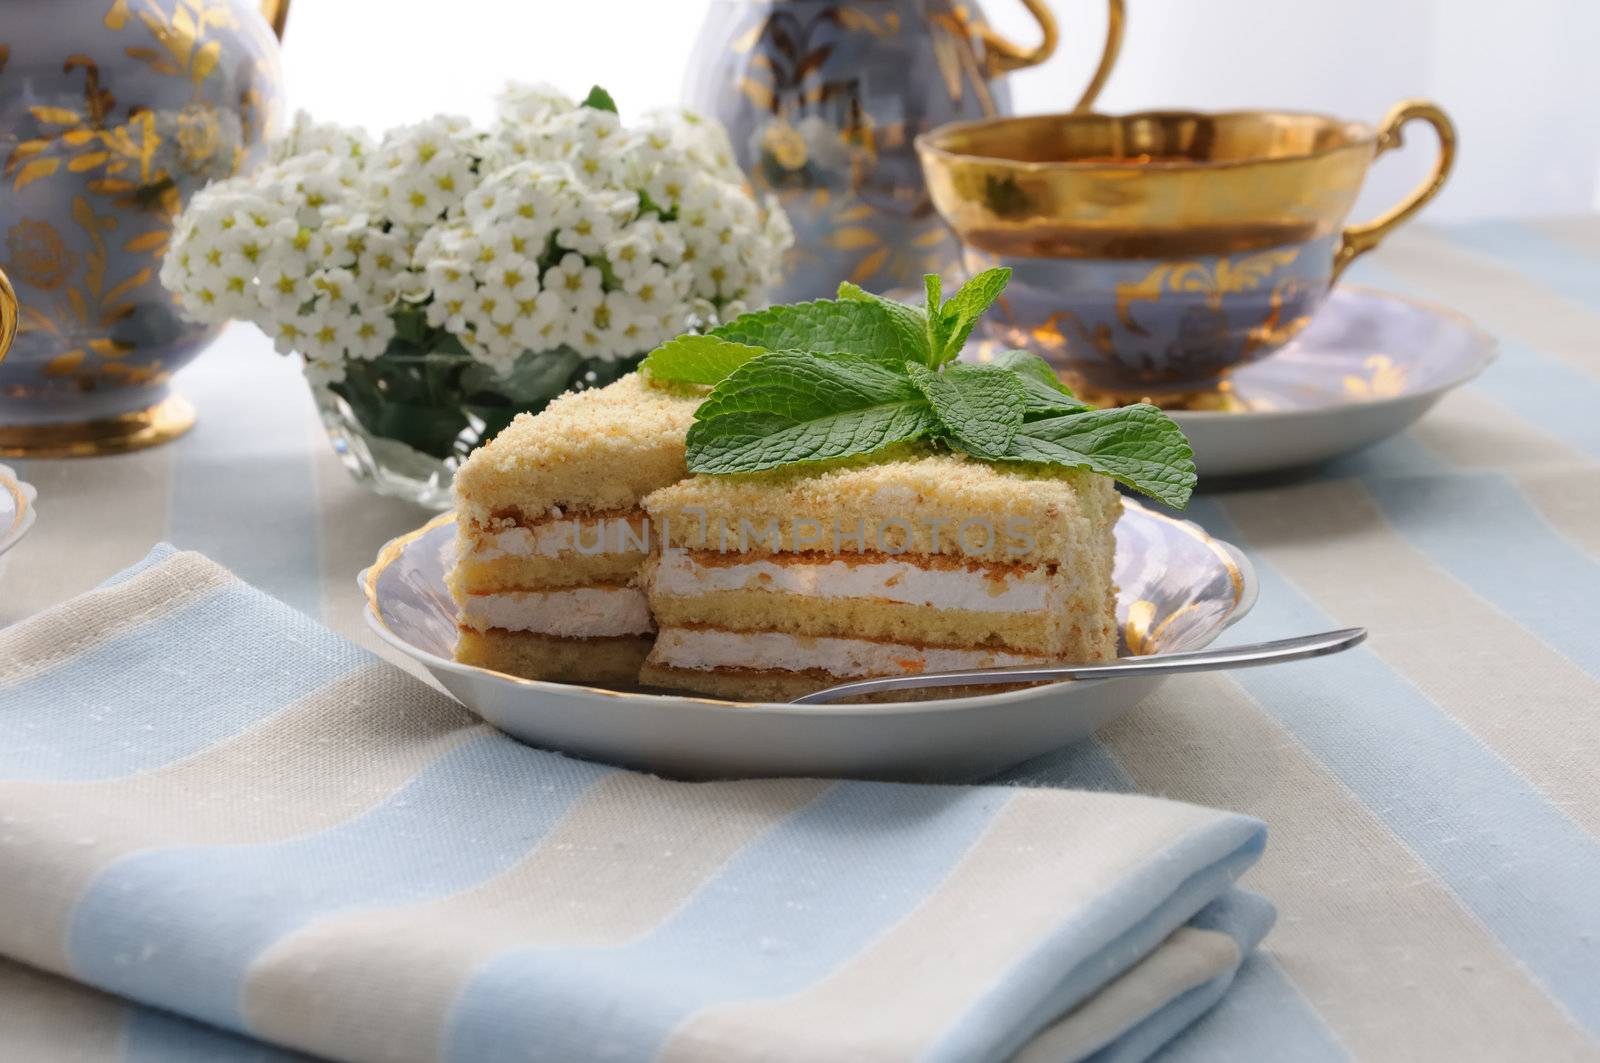 Sponge cake with a delicate souffle by Apolonia